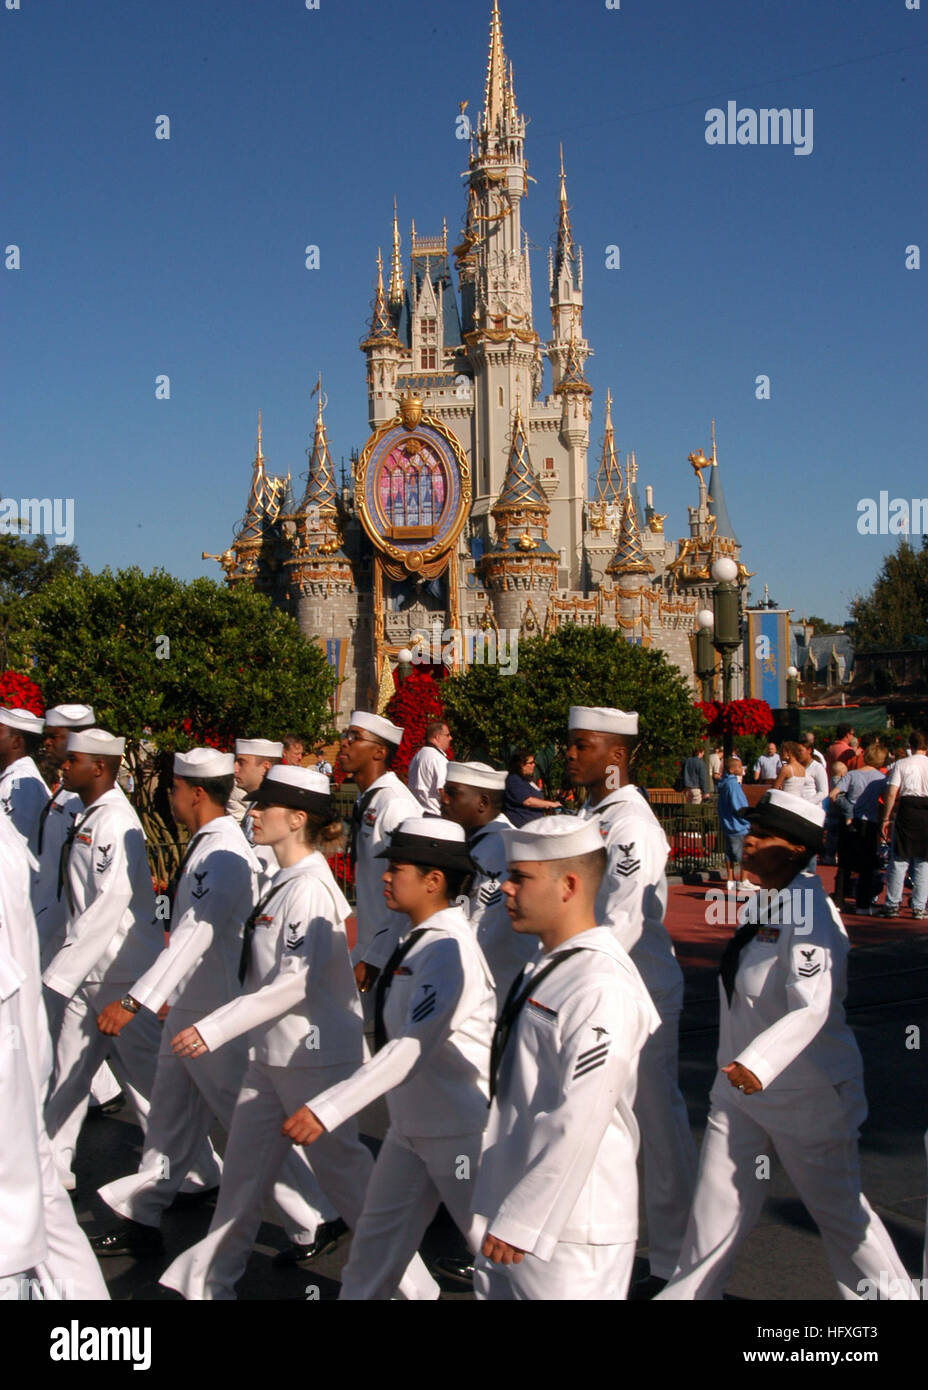 051204-N-6645H-076 Orlando, Fla. (Dec. 4, 2005) - Sailors from various U.S. Navy commands throughout Navy's Southeast Region march before Cinderella's Castle before entering onto Main St. inside Walt Disney World's Magic Kingdom. The Sailors were greeted by family members and guests and joined Disney World's Military Salute for its 2005 Christmas Day Parade taping. U.S. Navy photo by PhotographerÕs Mate 3rd Class Adam J. Herrada (RELEASED) US Navy 051204-N-6645H-076 Sailors from various U.S. Navy commands throughout Navy's Southeast Region march before Cinderella's Castle before entering onto  Stock Photo